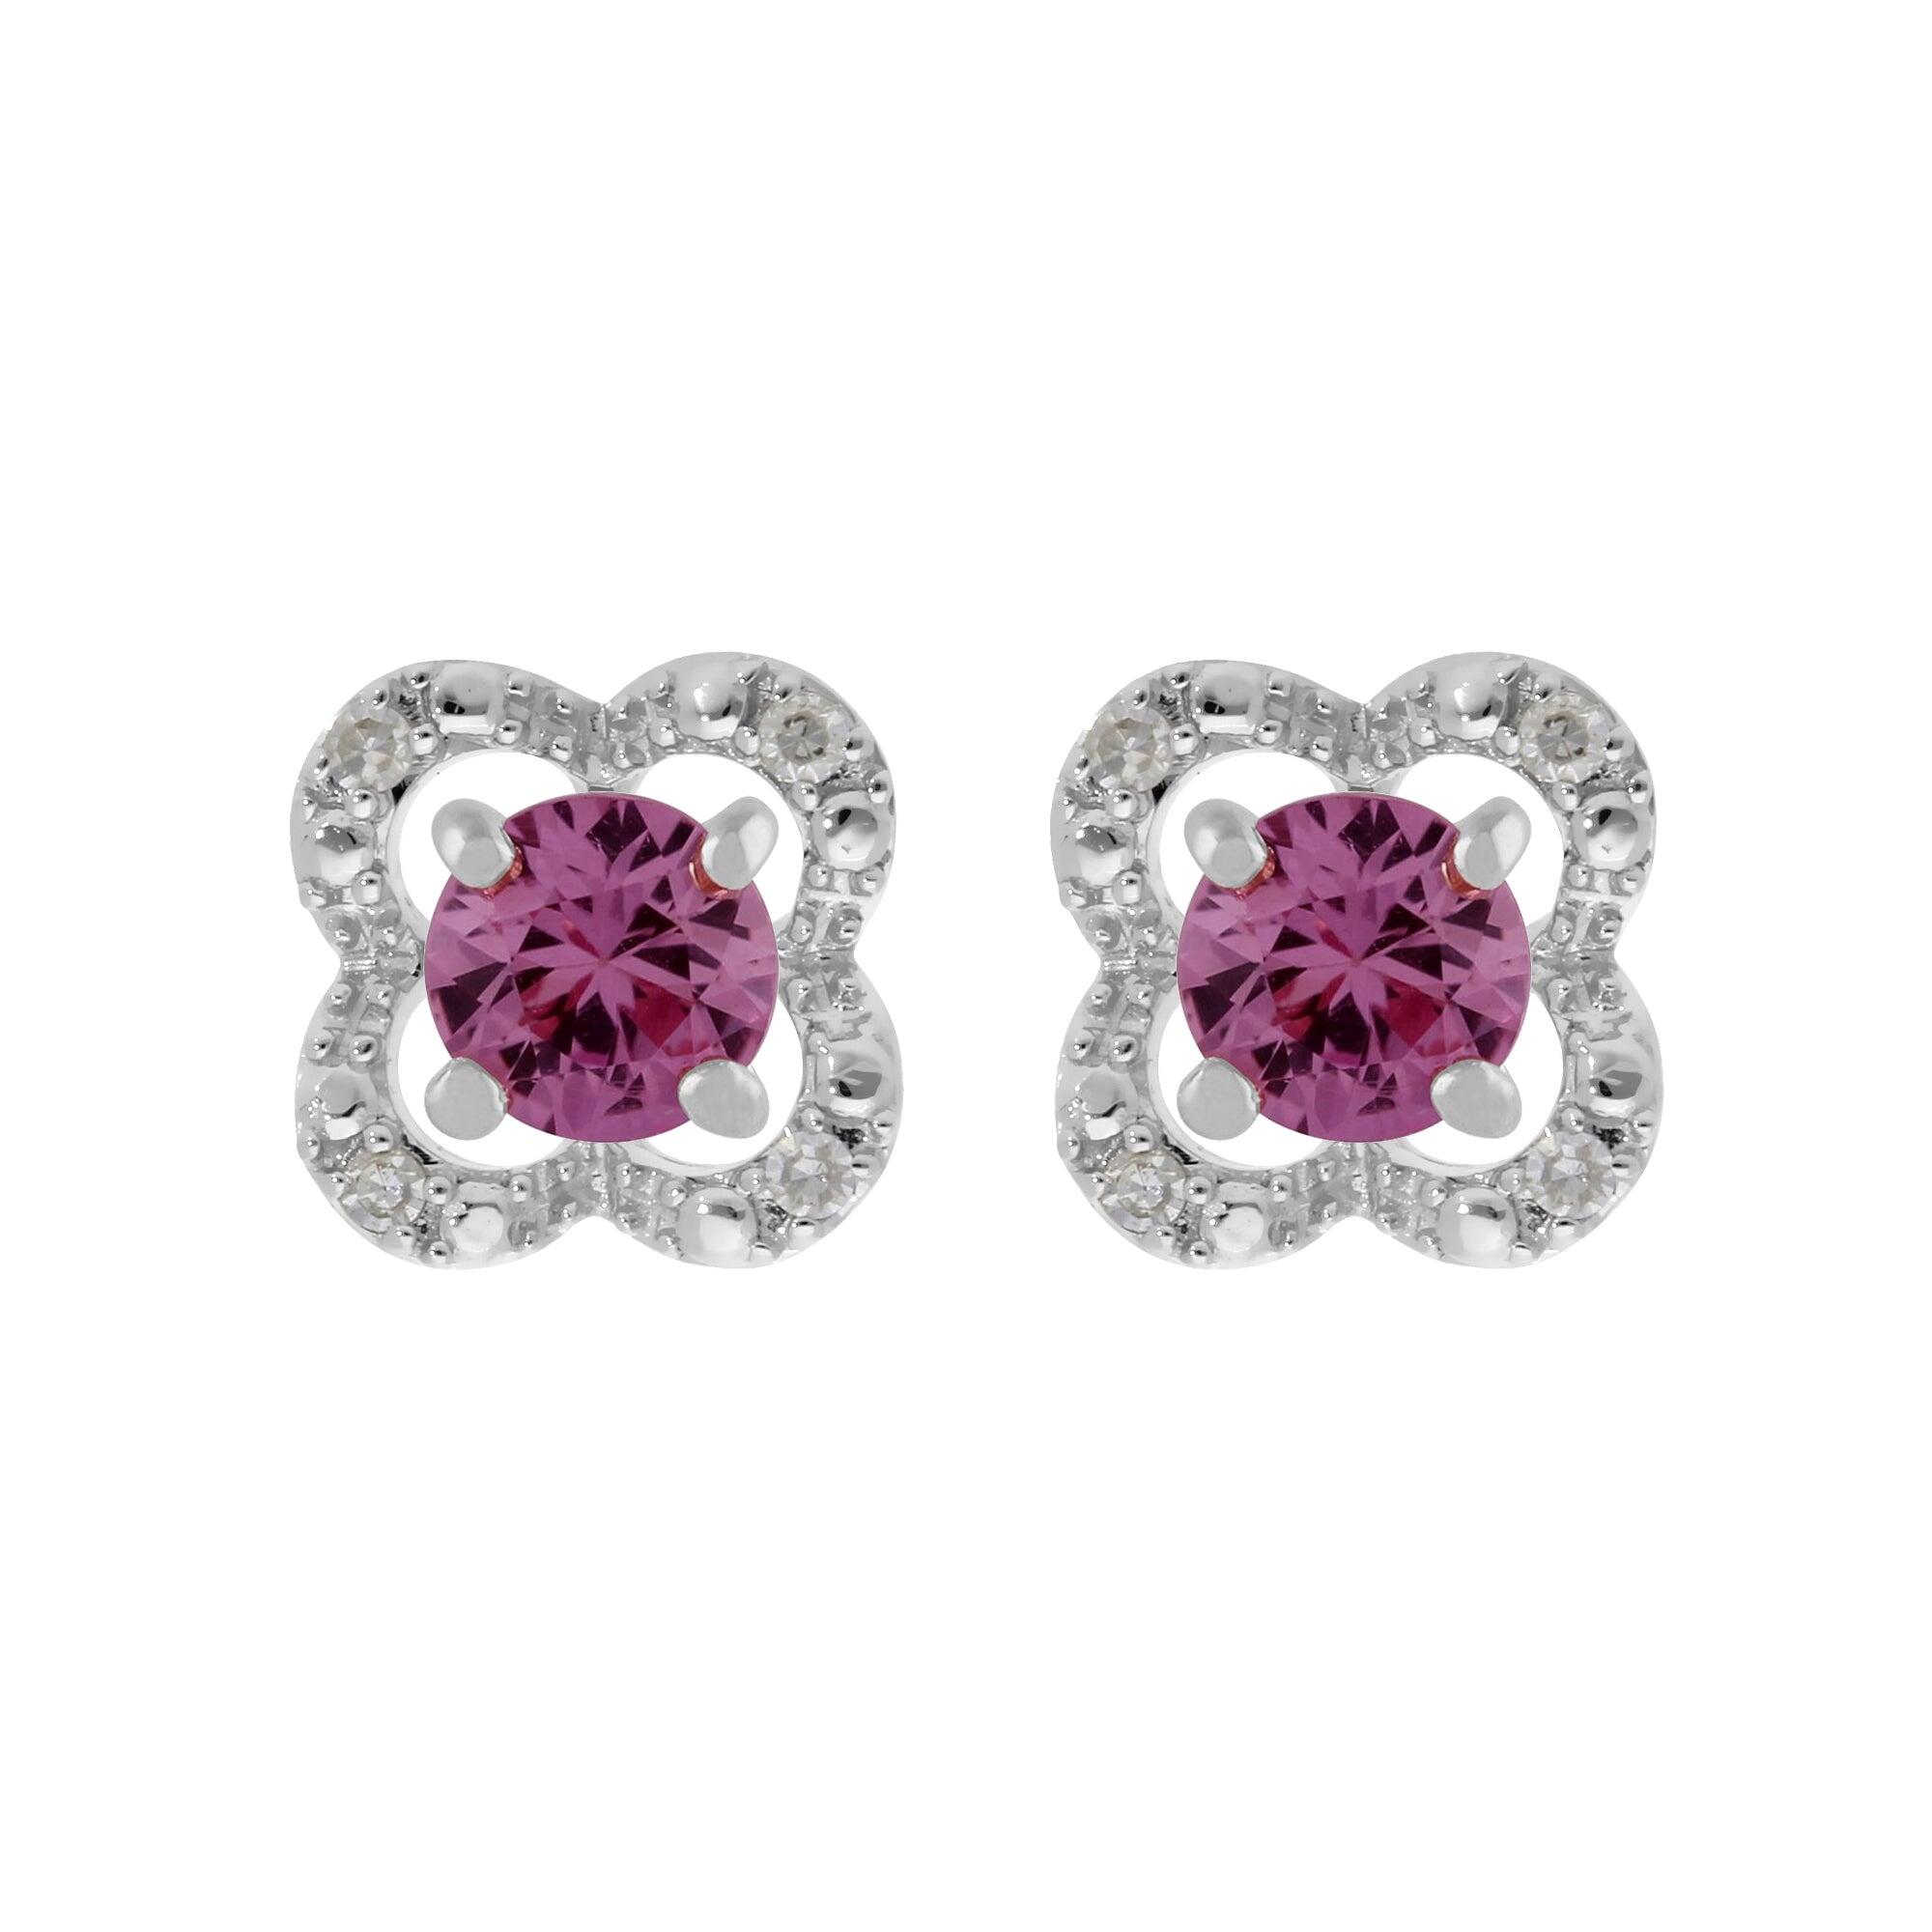 Classic Round Pink Sapphire Studs with Detachable Diamond Flower Ear Jacket in 9ct White Gold